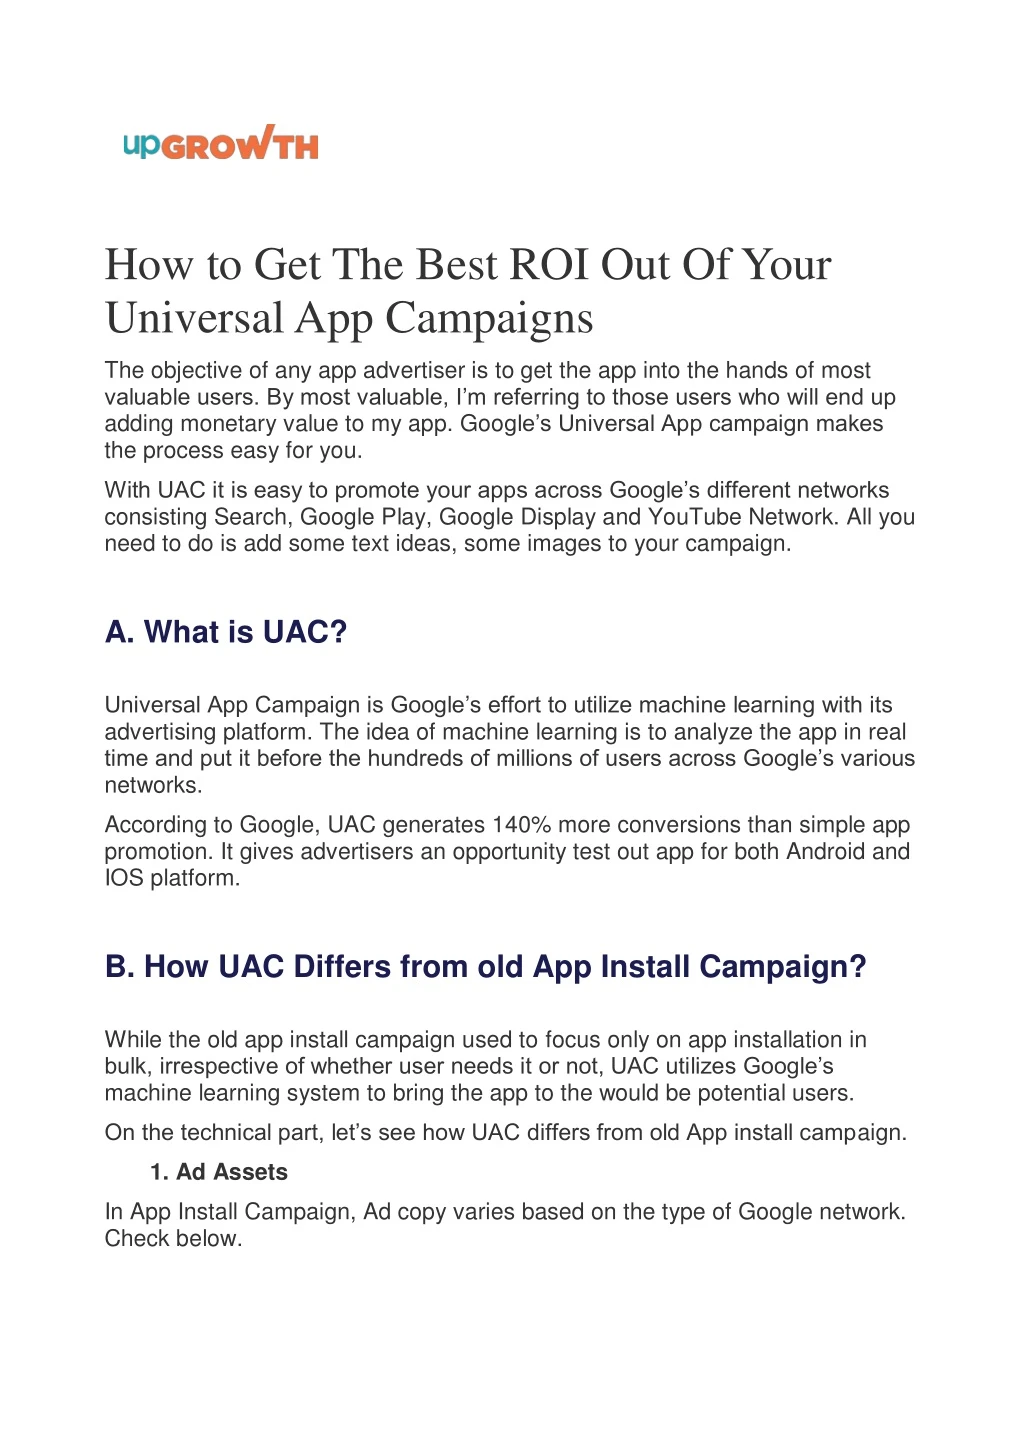 how to get the best roi out of your universal